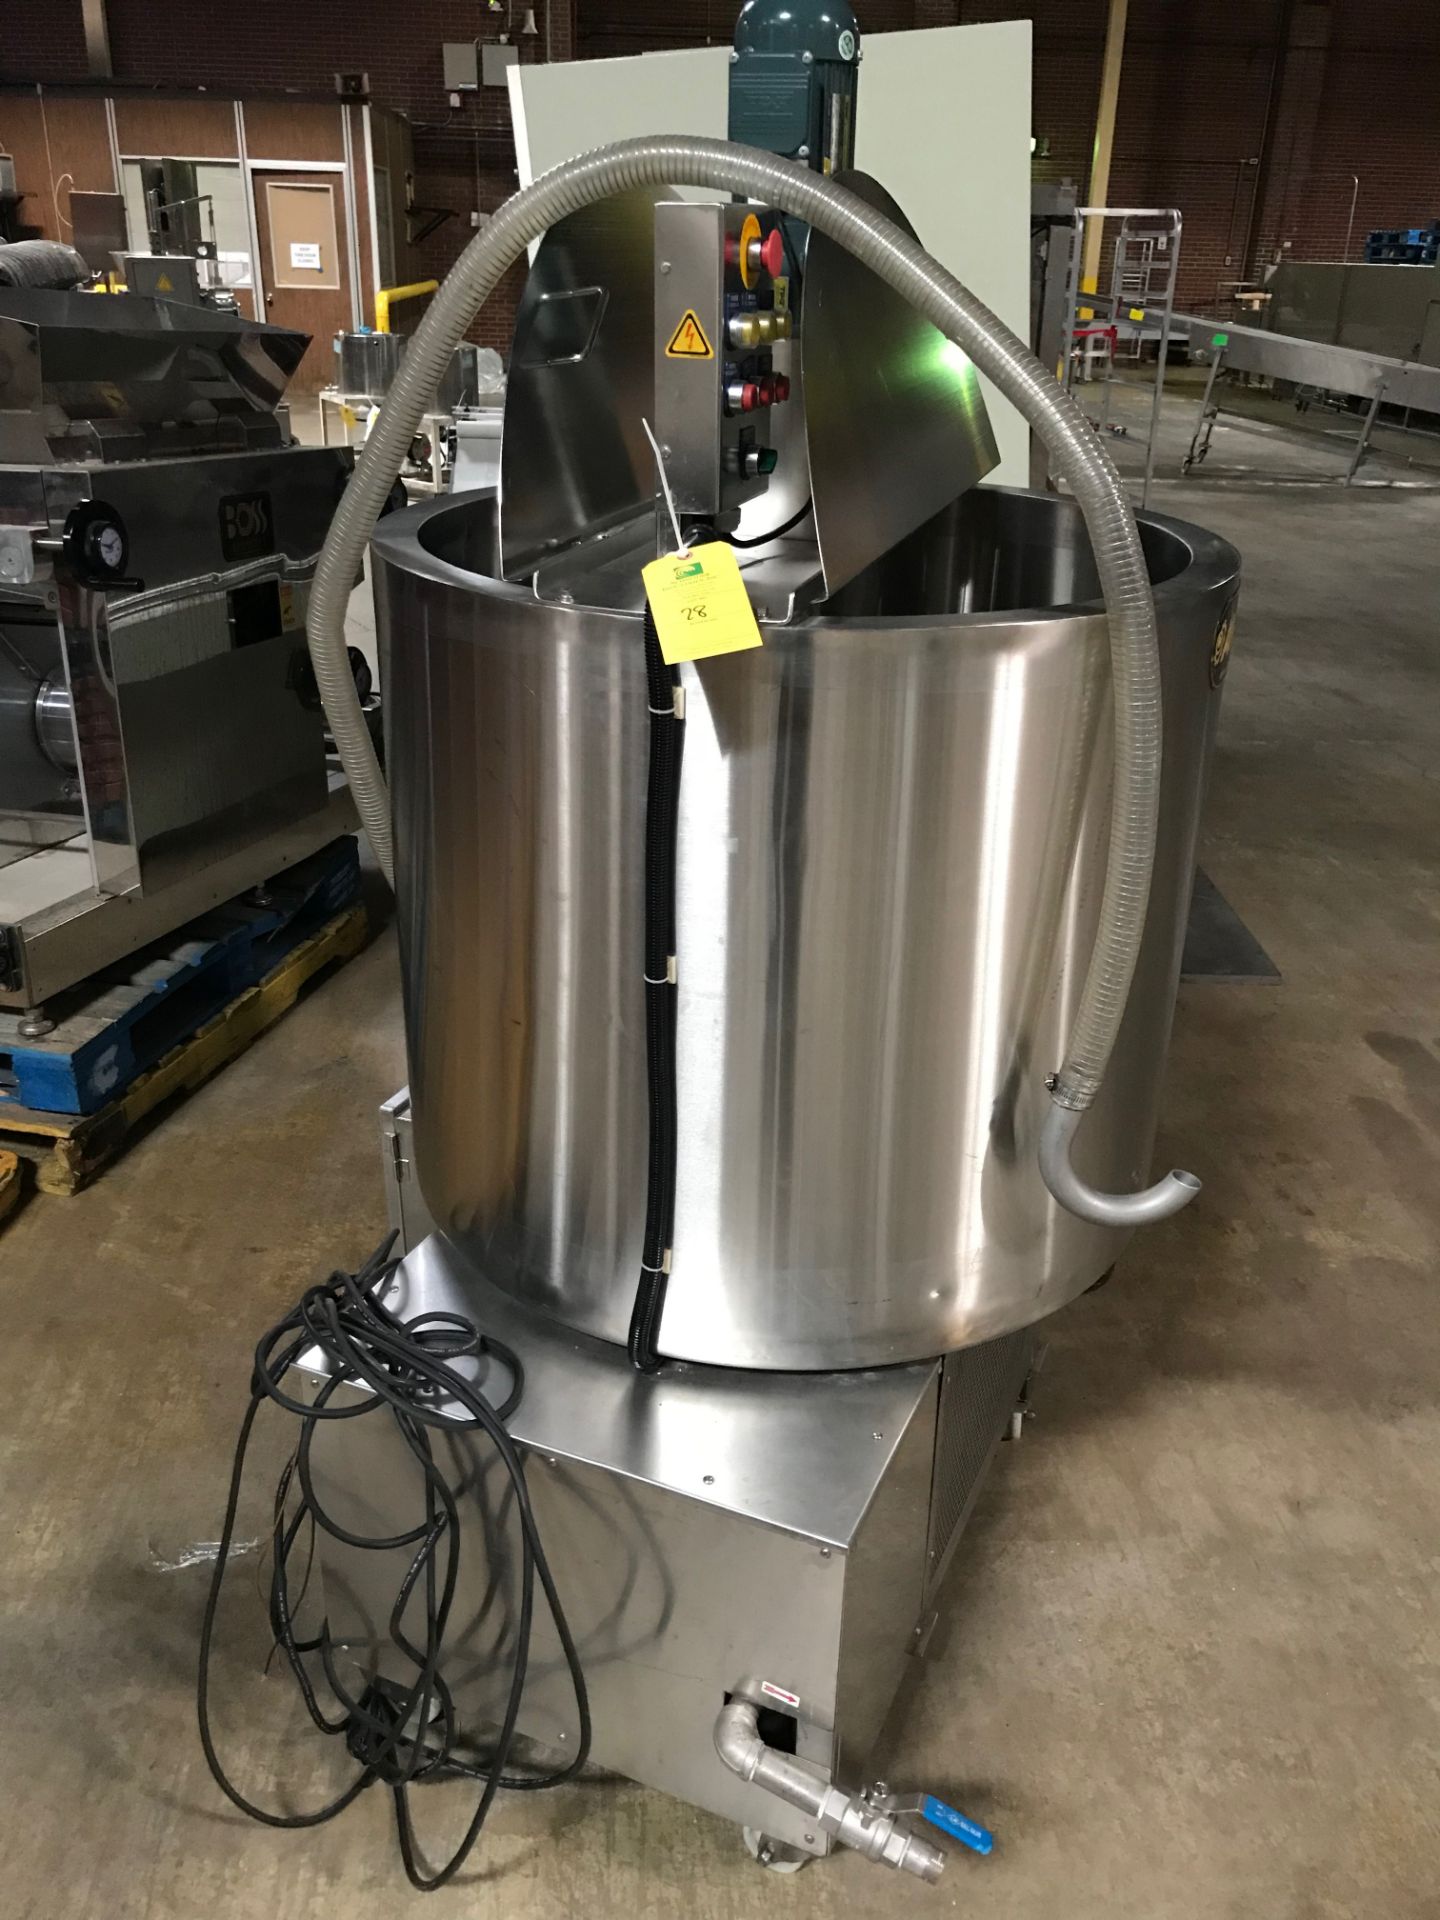 NEW Anko Stainless Steel Mixer with Discharge Pump, 31 Inch Diameter x 3 Feet Tall, 220 Volts, 60Hz,